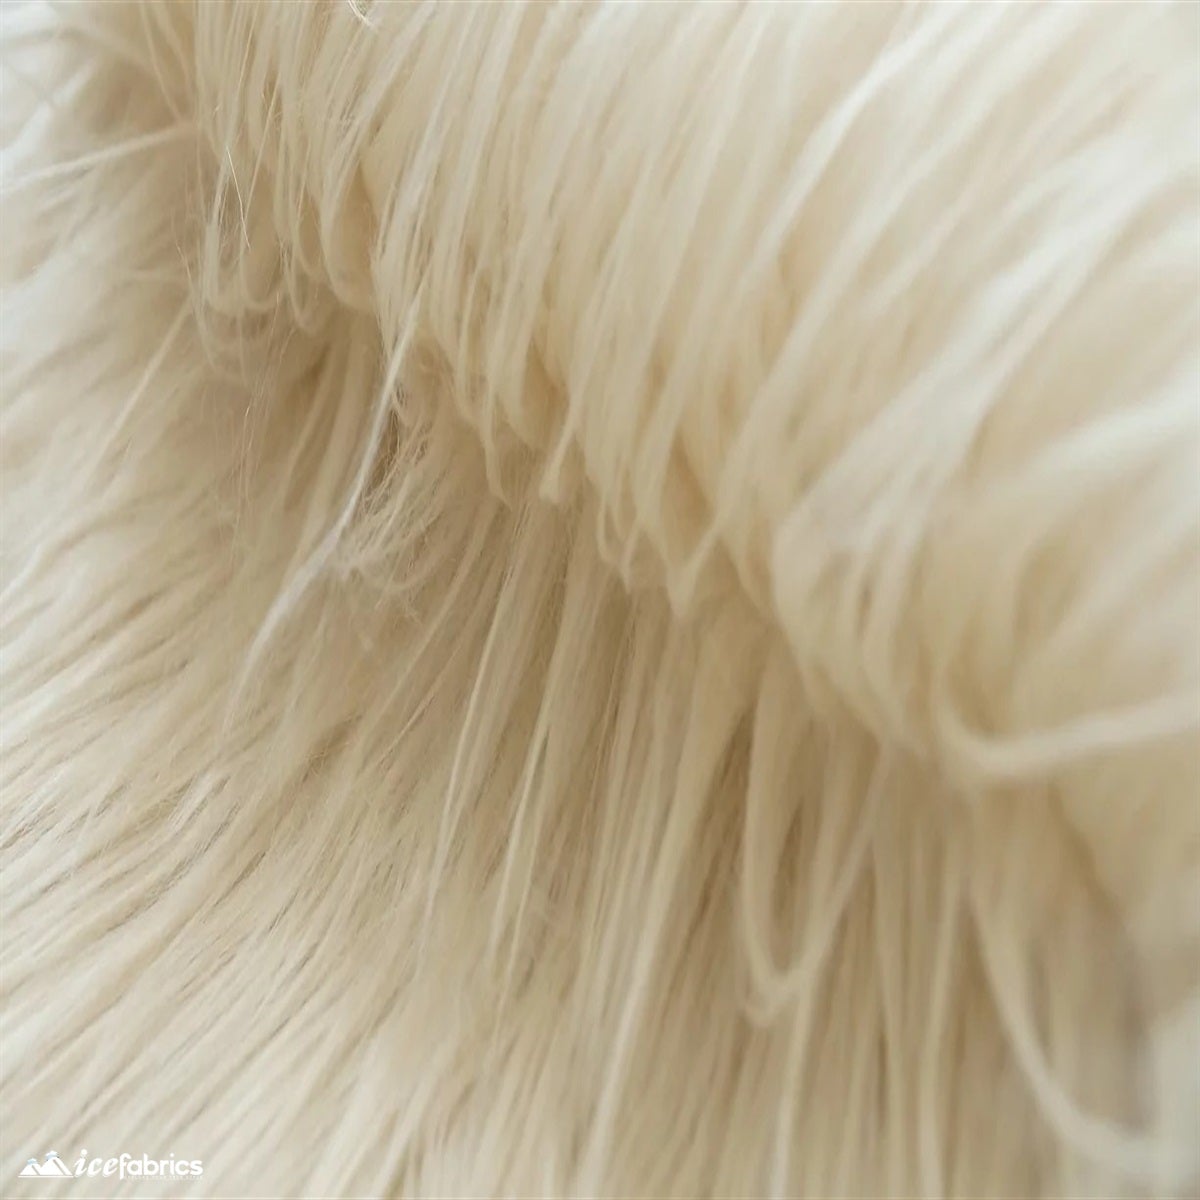 Mohair Faux Fur Fabric By The Roll (20 Yards) 4 Inch PileICE FABRICSICE FABRICSCreamBy The Roll (60" Wide)Mohair Faux Fur Fabric By The Roll (20 Yards) 4 Inch Pile ICE FABRICS